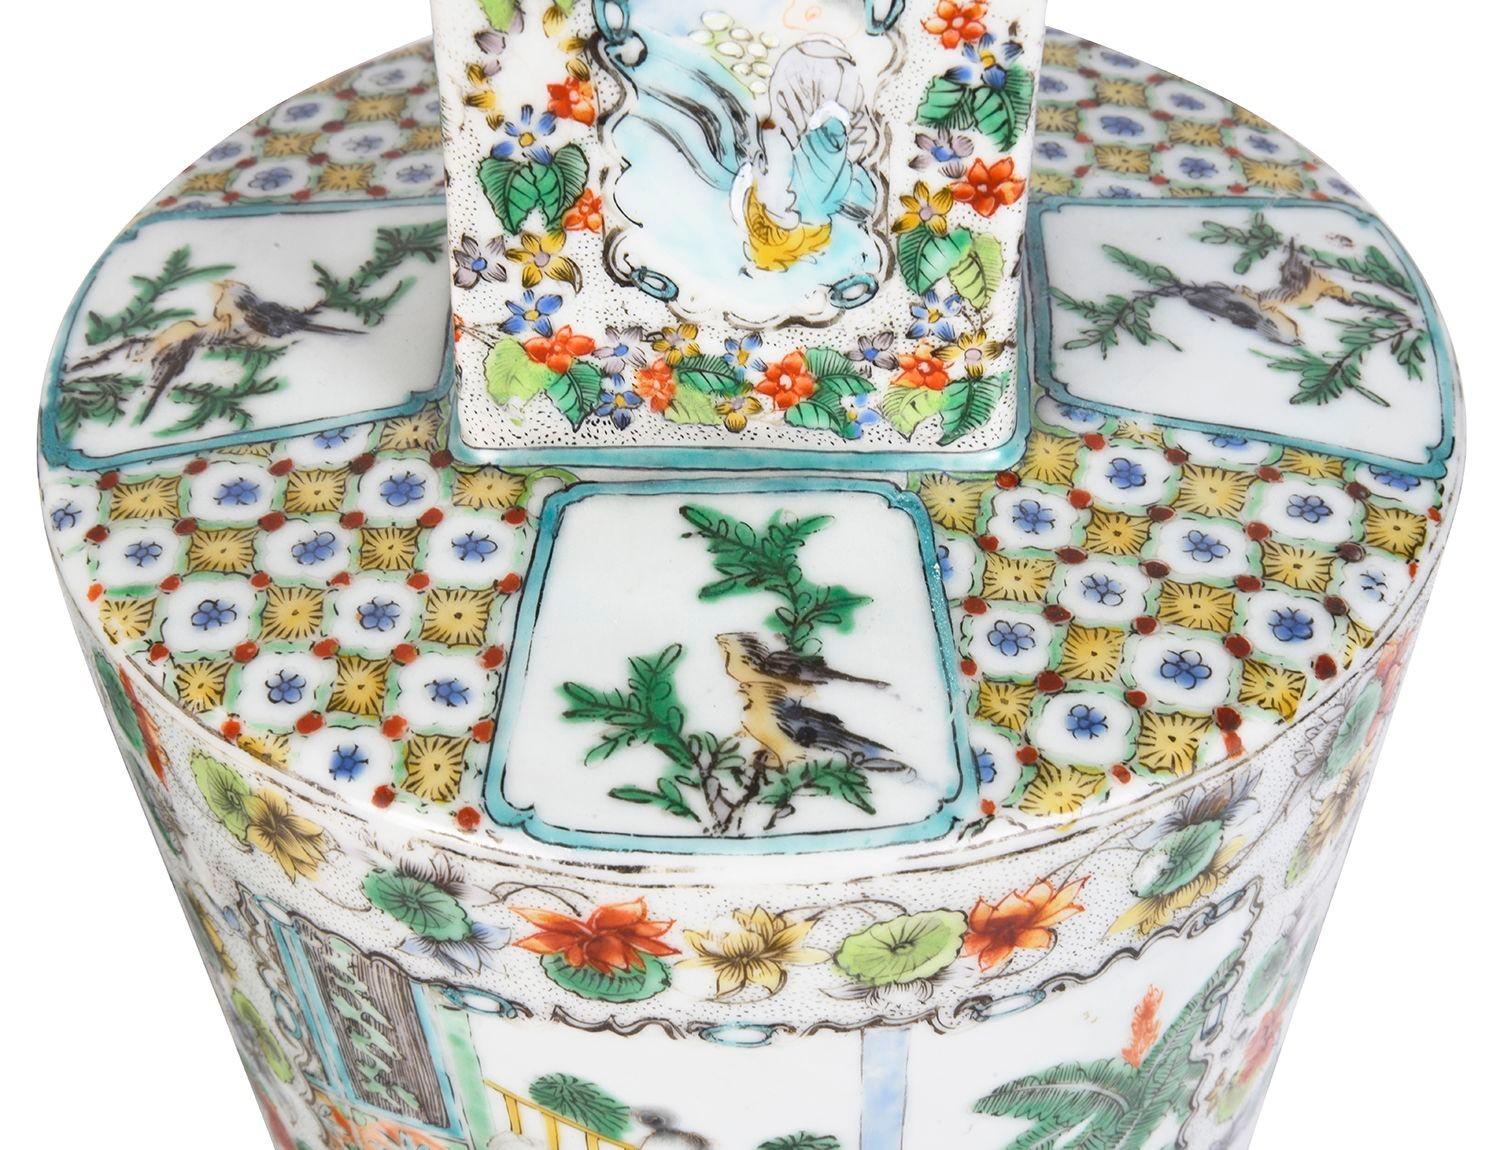 A very decoration and stylish pair of late 19th Century Chinese Famille Verte vases, having inset hand painted panels depicting Classical Chinese interior scenes, set among floral and foliate boarders.

We can convert to lamps if required.

Batch 74